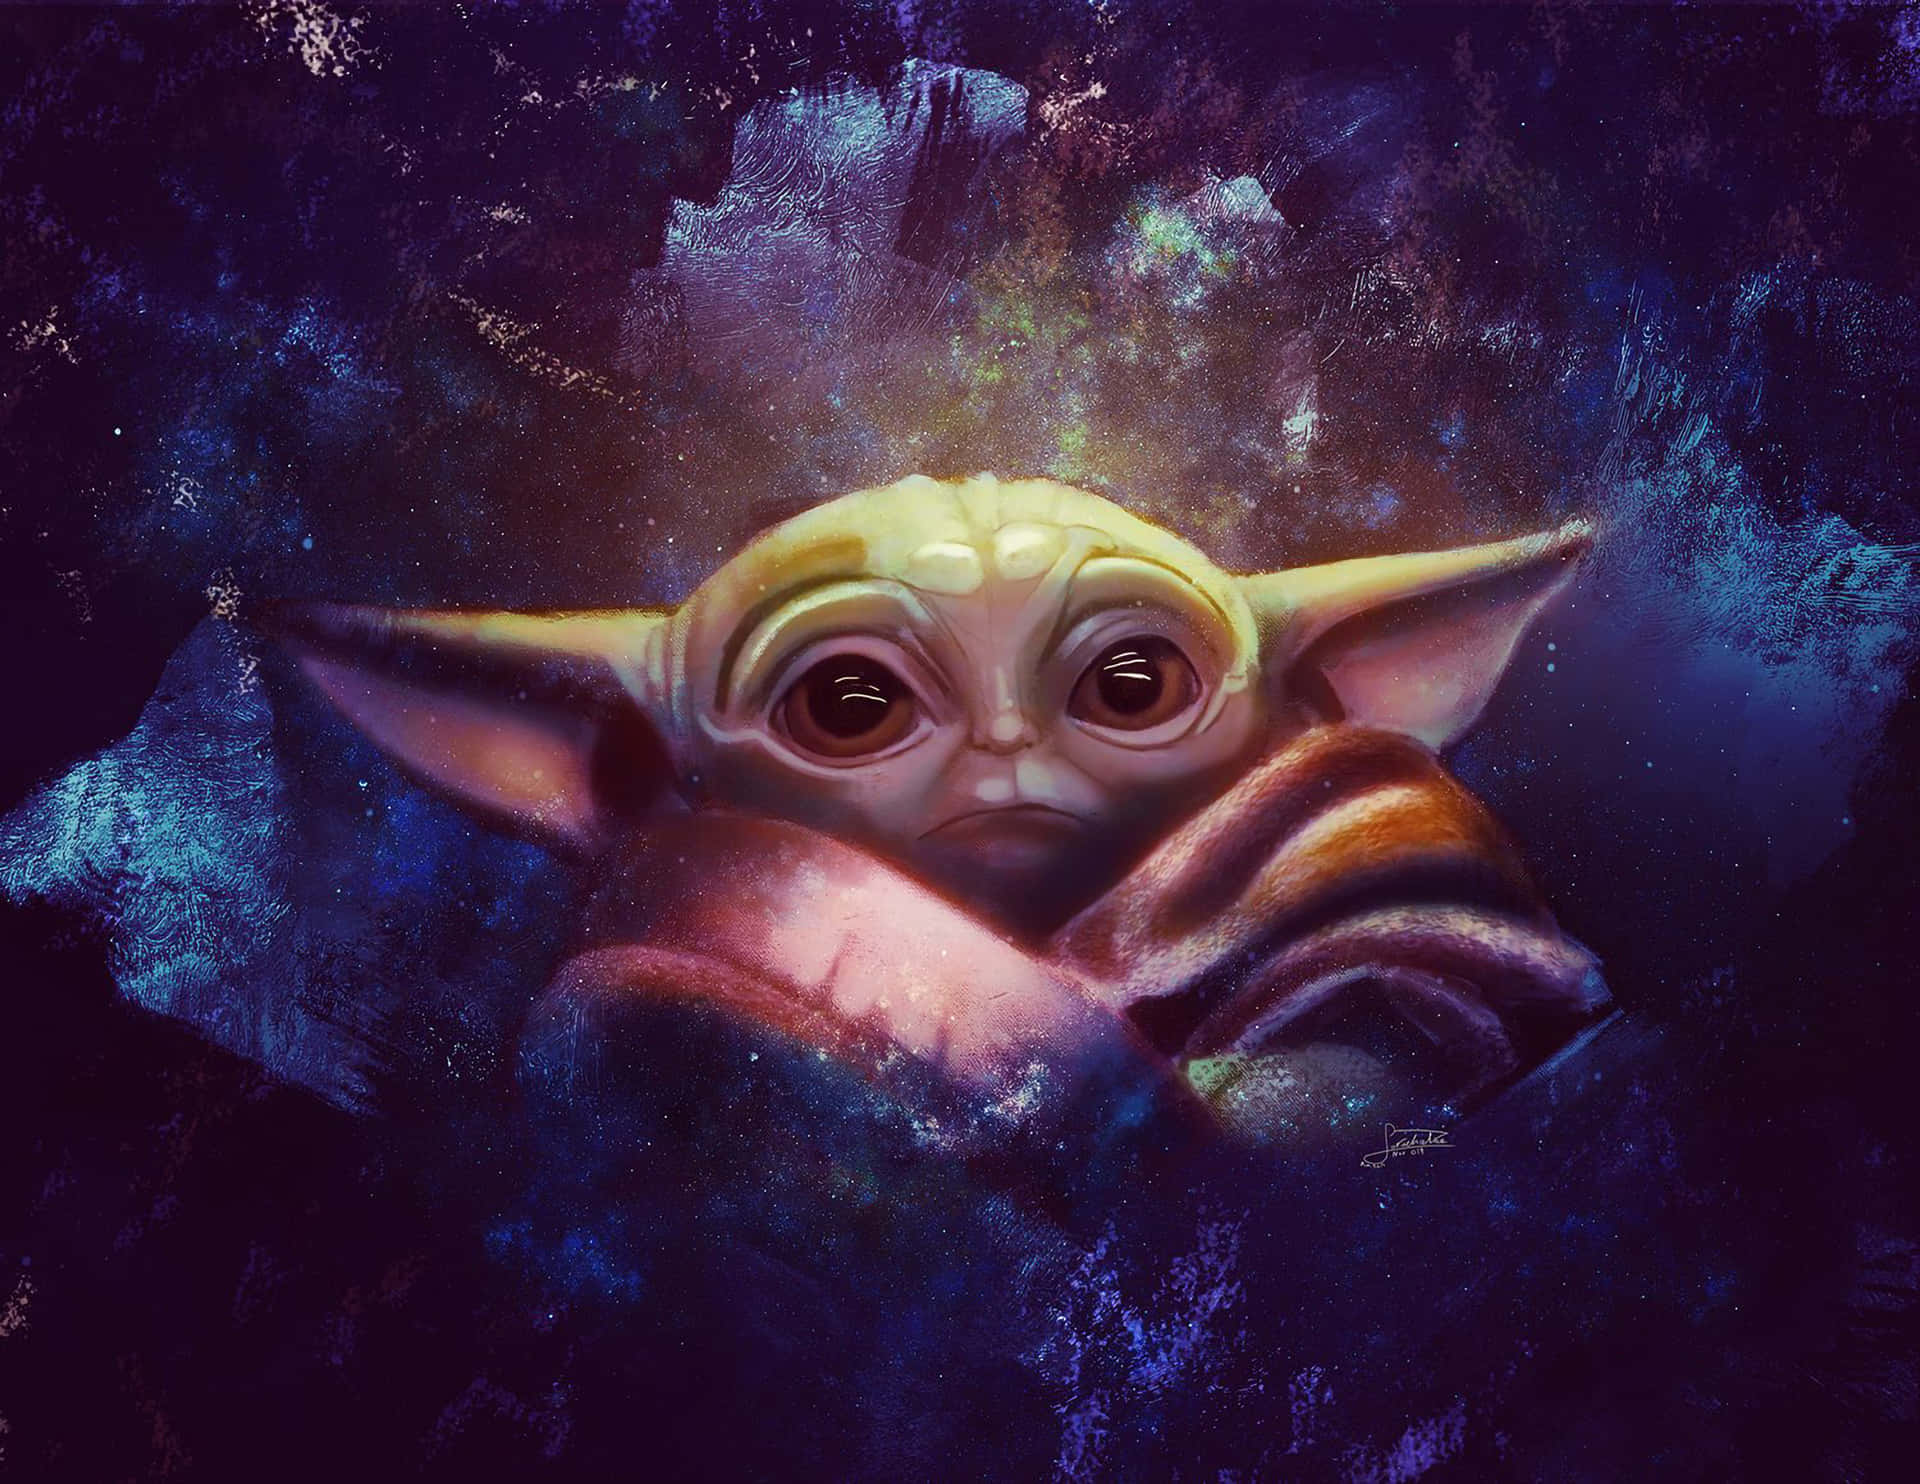 The Baby Yoda Everyone has been Waiting For